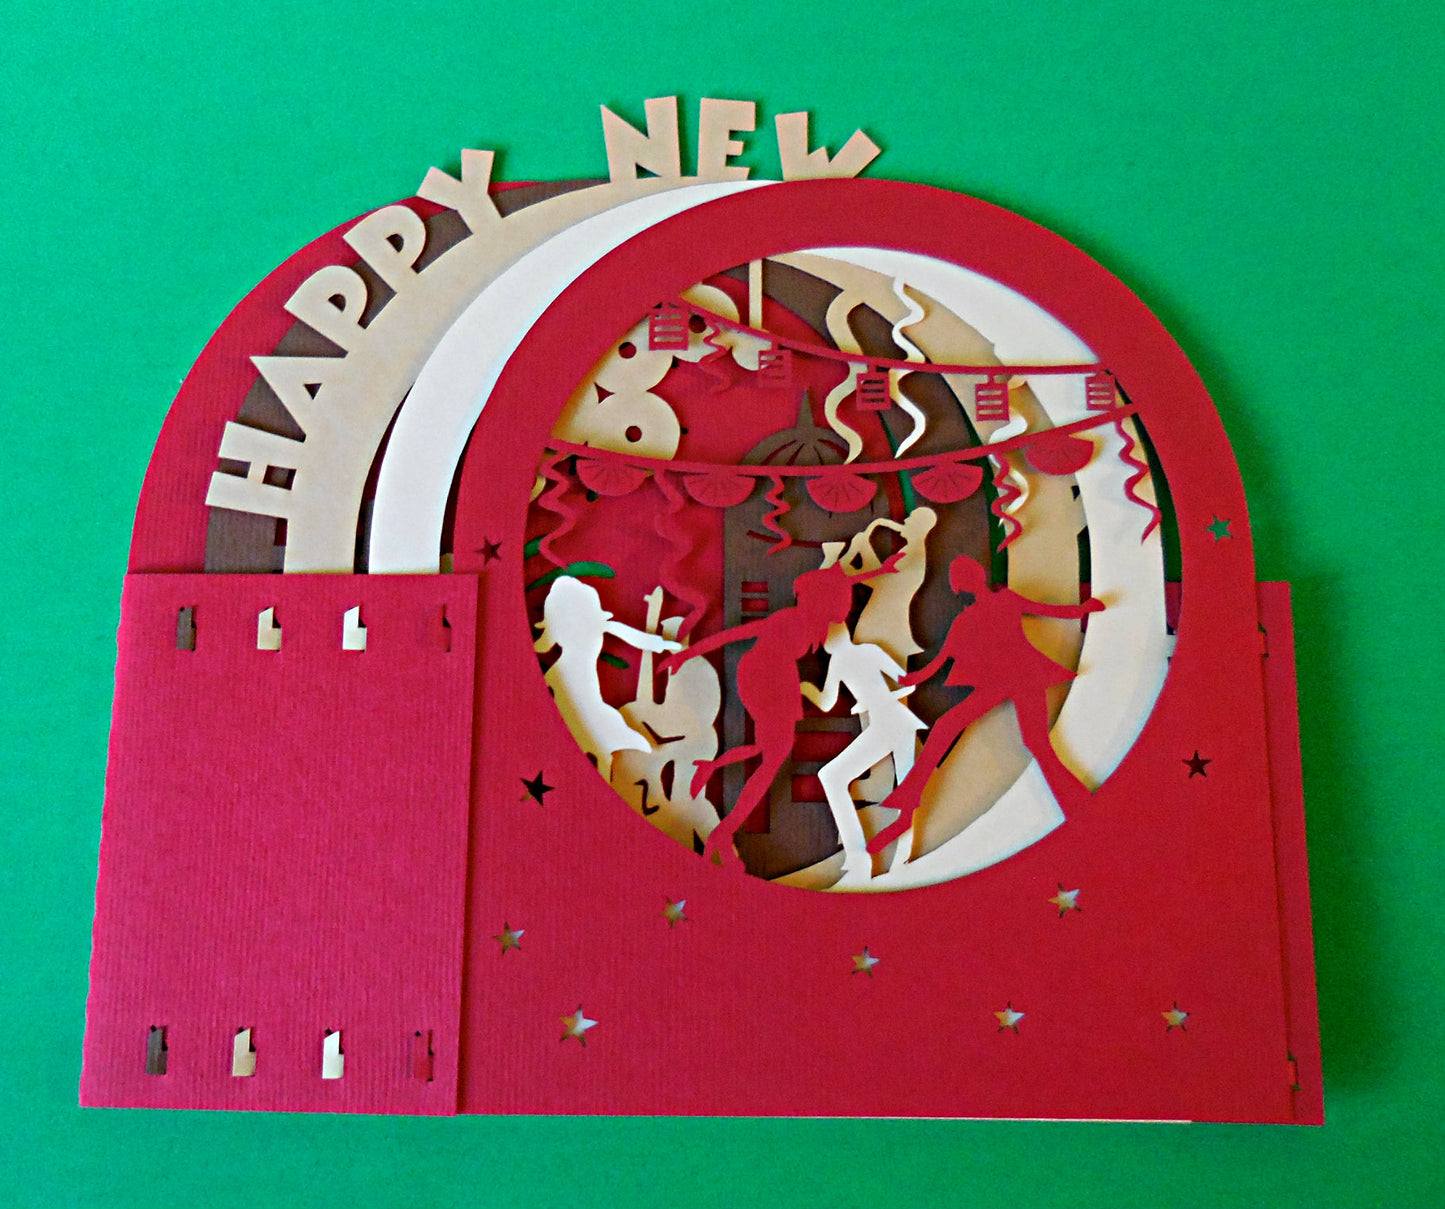 New Year (Red) 3D Pop Up Centerpiece - Centerpiece - Christmas - New Years - iGifts And Cards